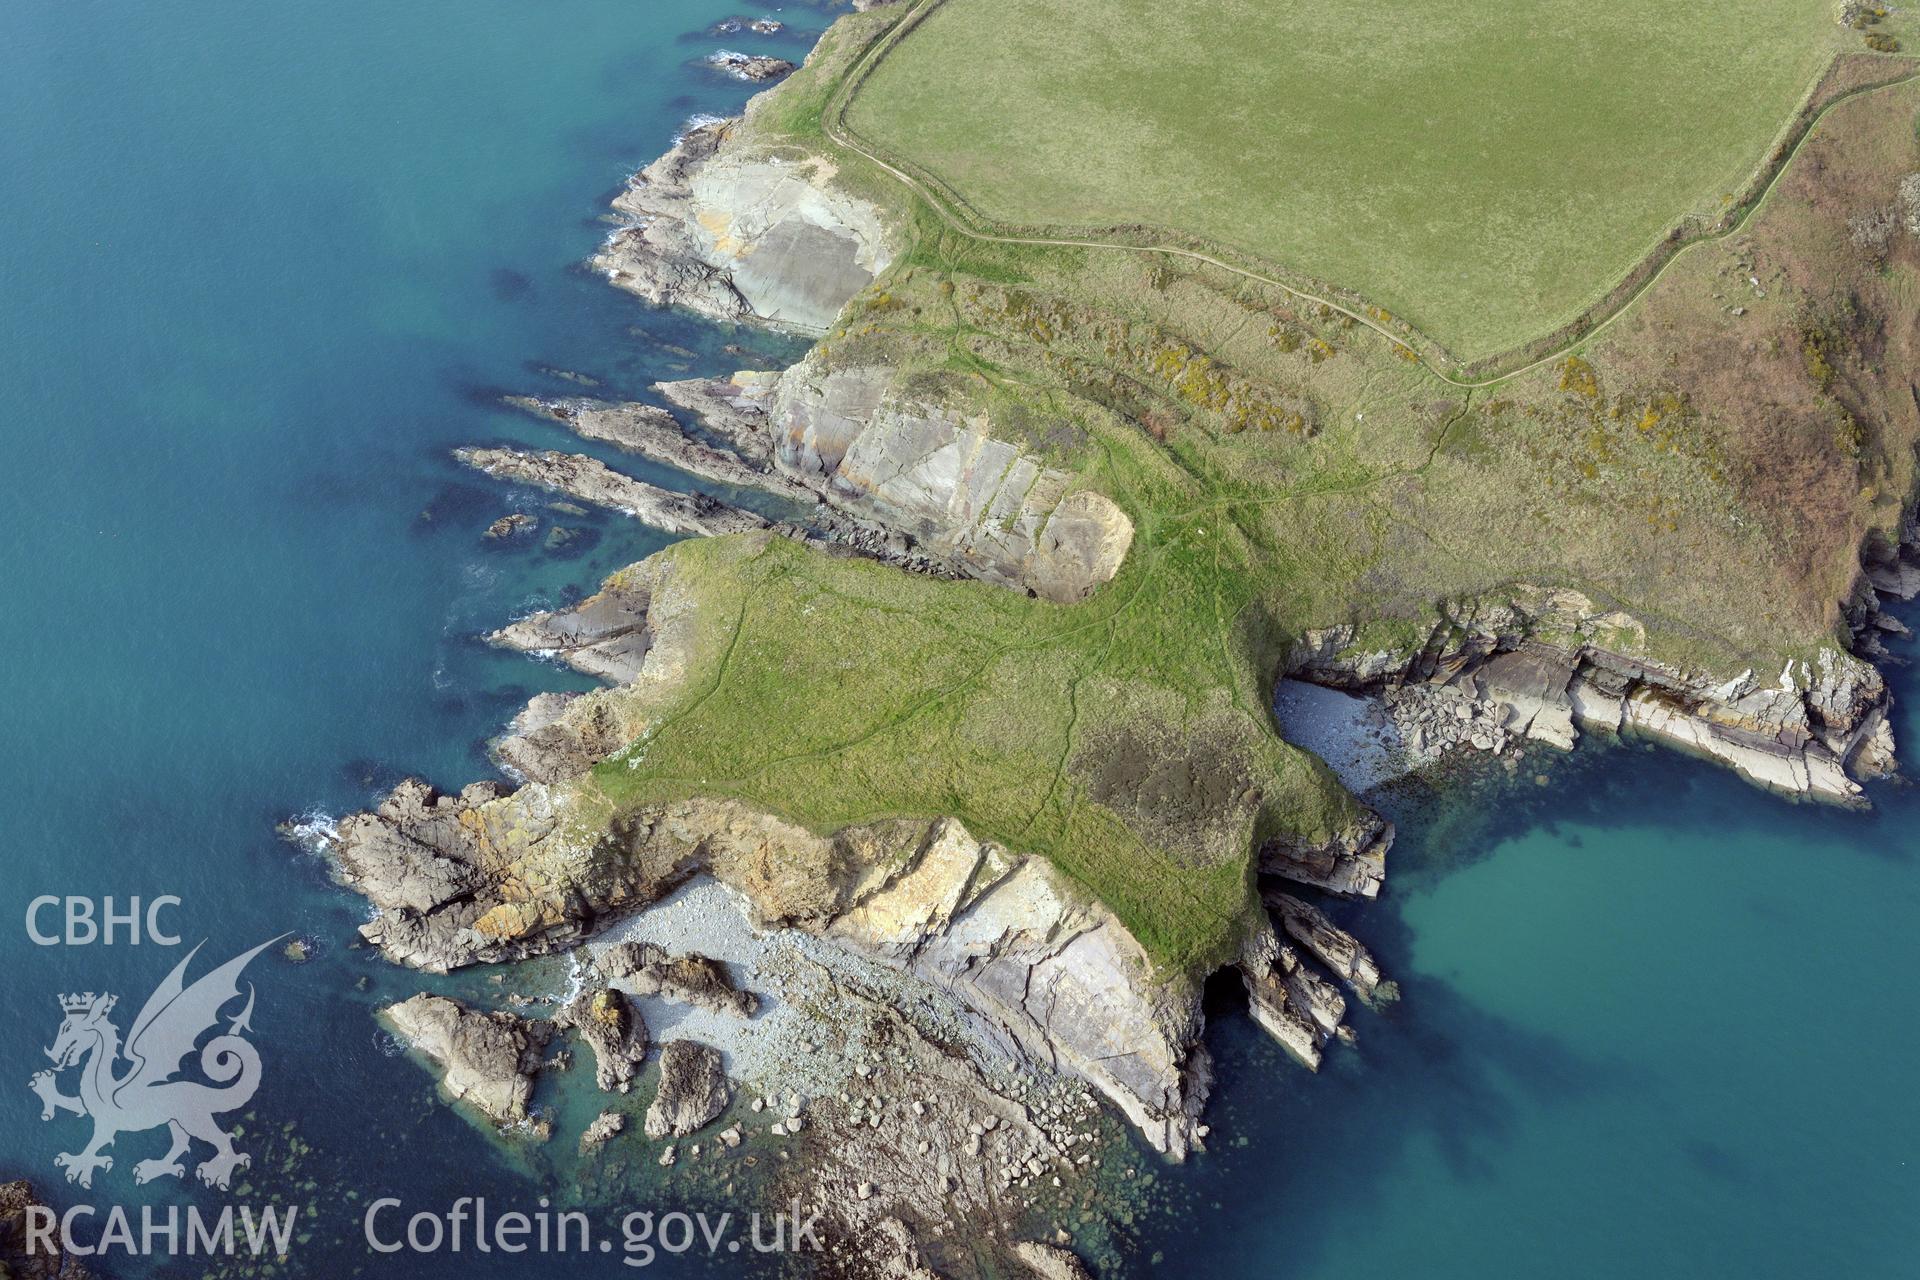 Aerial photography of Penpleidiau promontory fort taken on 27th March 2017. Baseline aerial reconnaissance survey for the CHERISH Project. ? Crown: CHERISH PROJECT 2017. Produced with EU funds through the Ireland Wales Co-operation Programme 2014-2020. All material made freely available through the Open Government Licence.